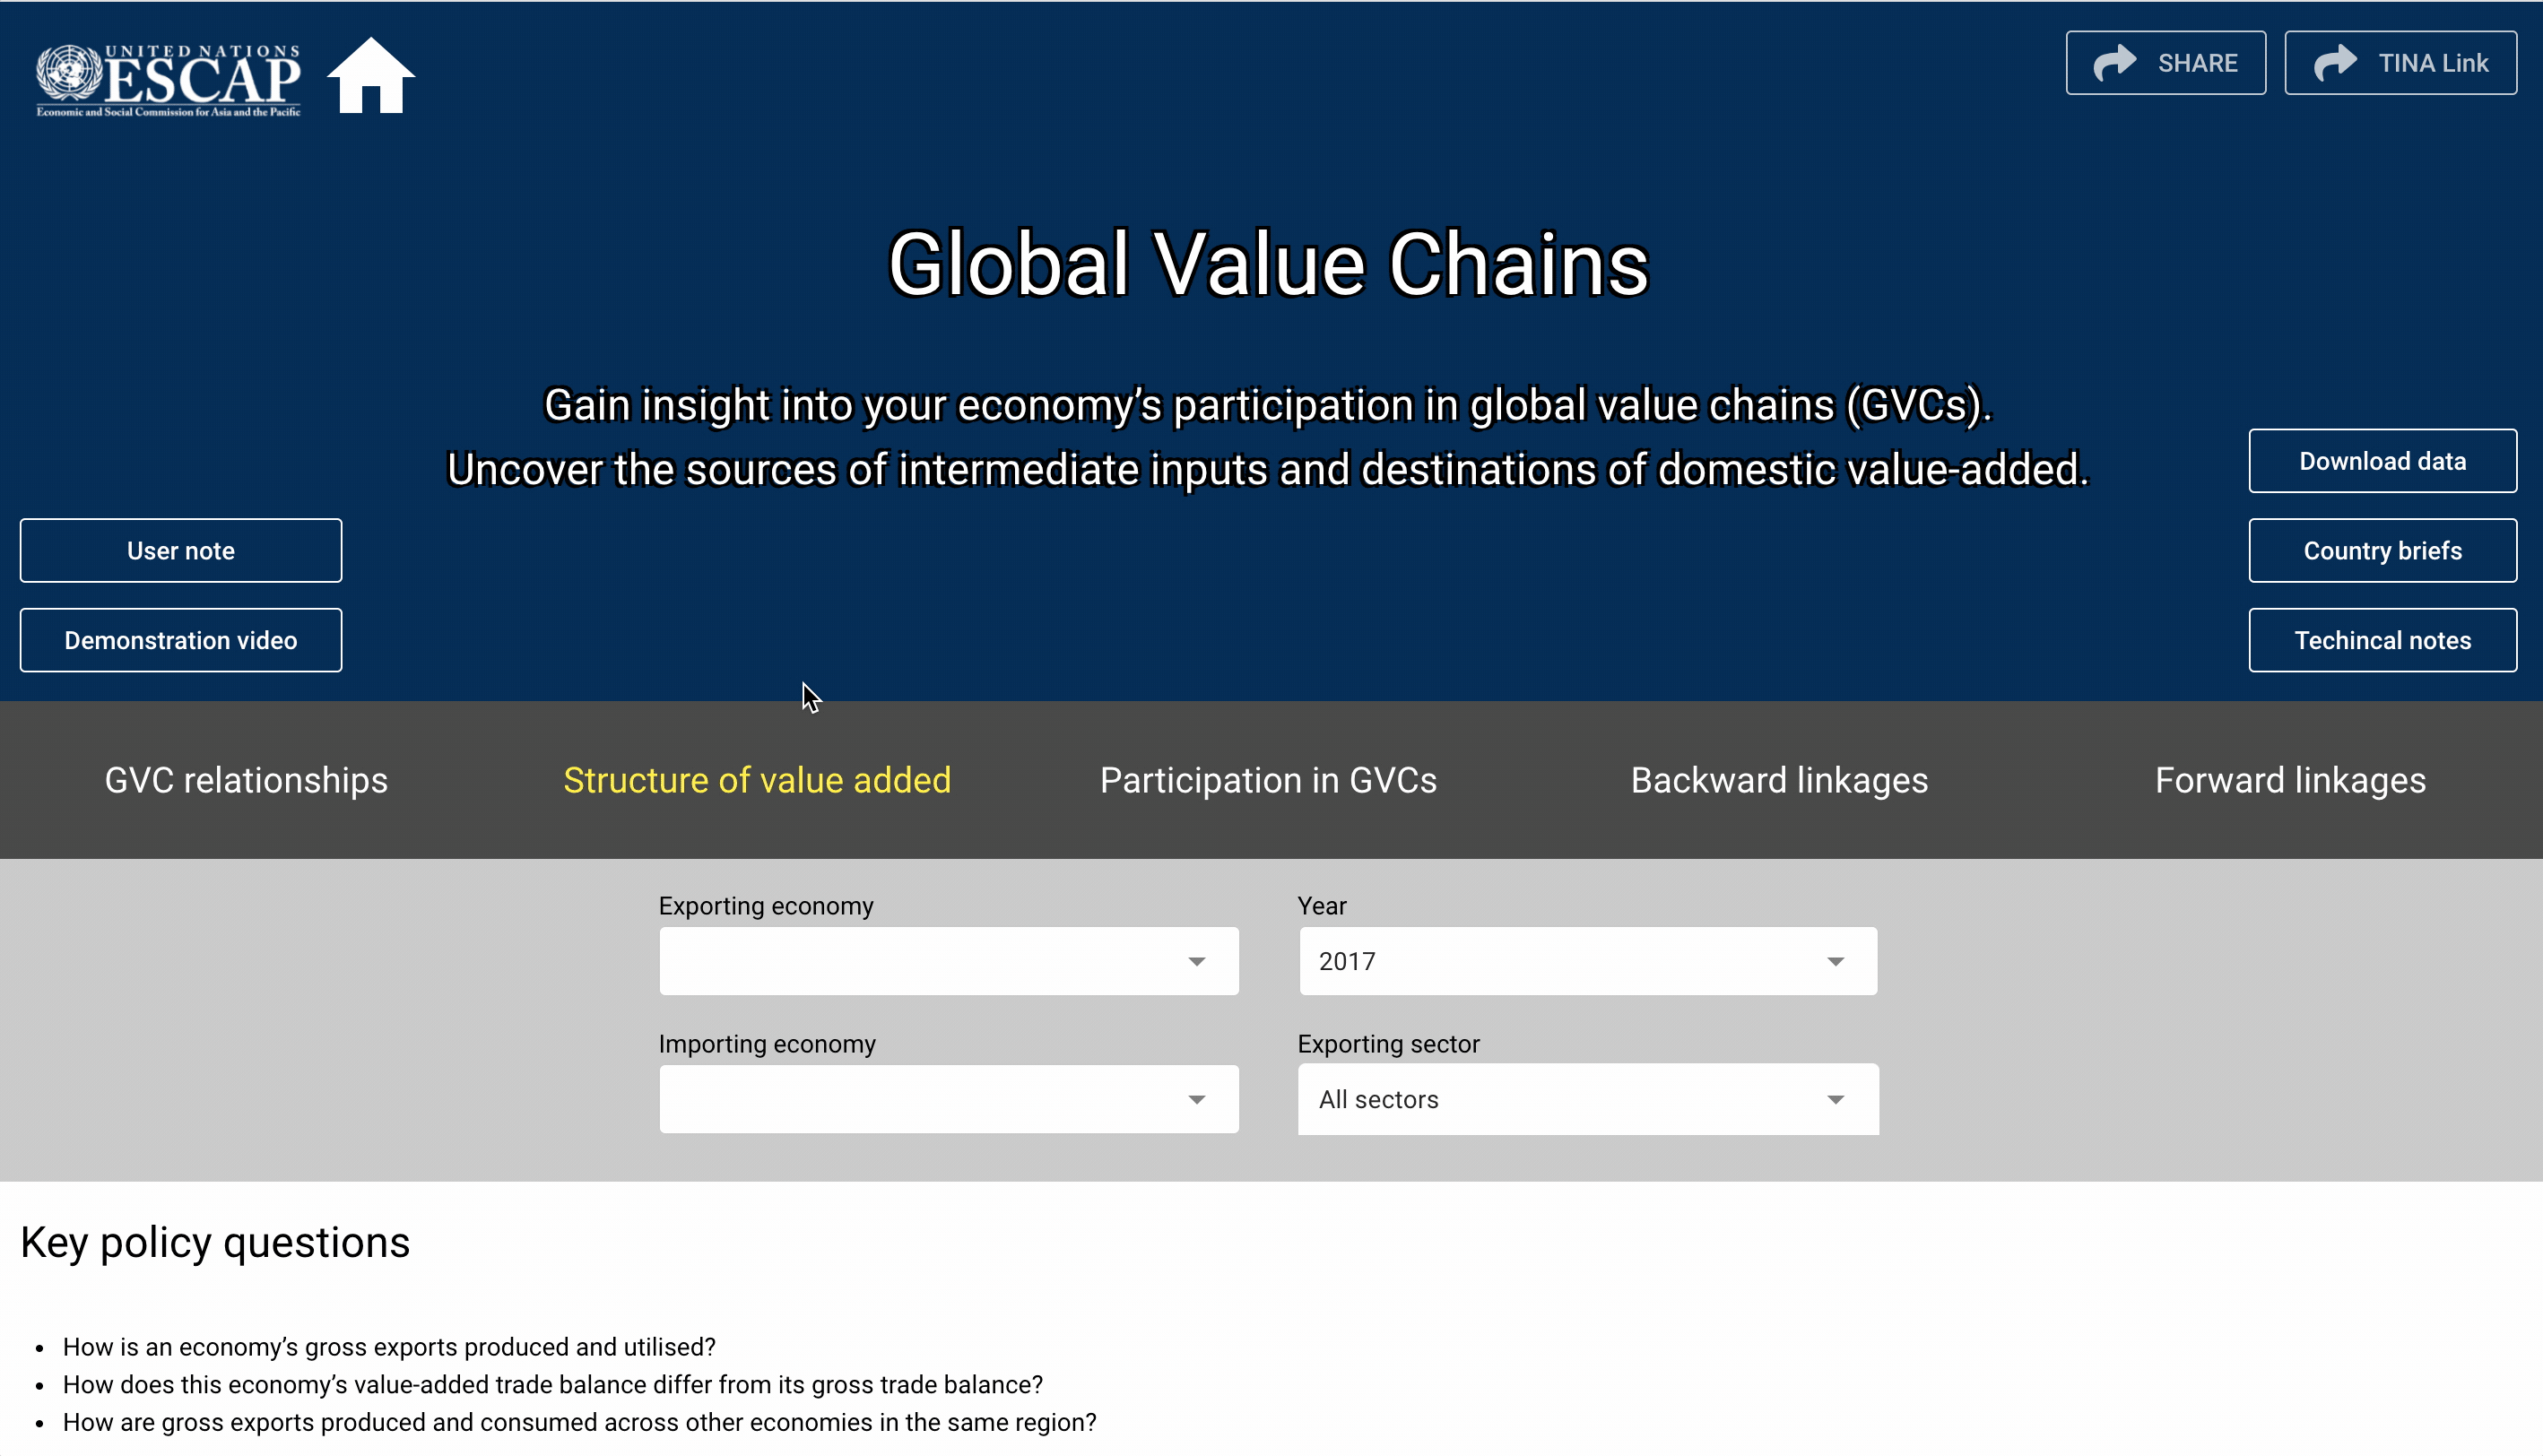 Structure of value added: Choosing exporting and importing economies